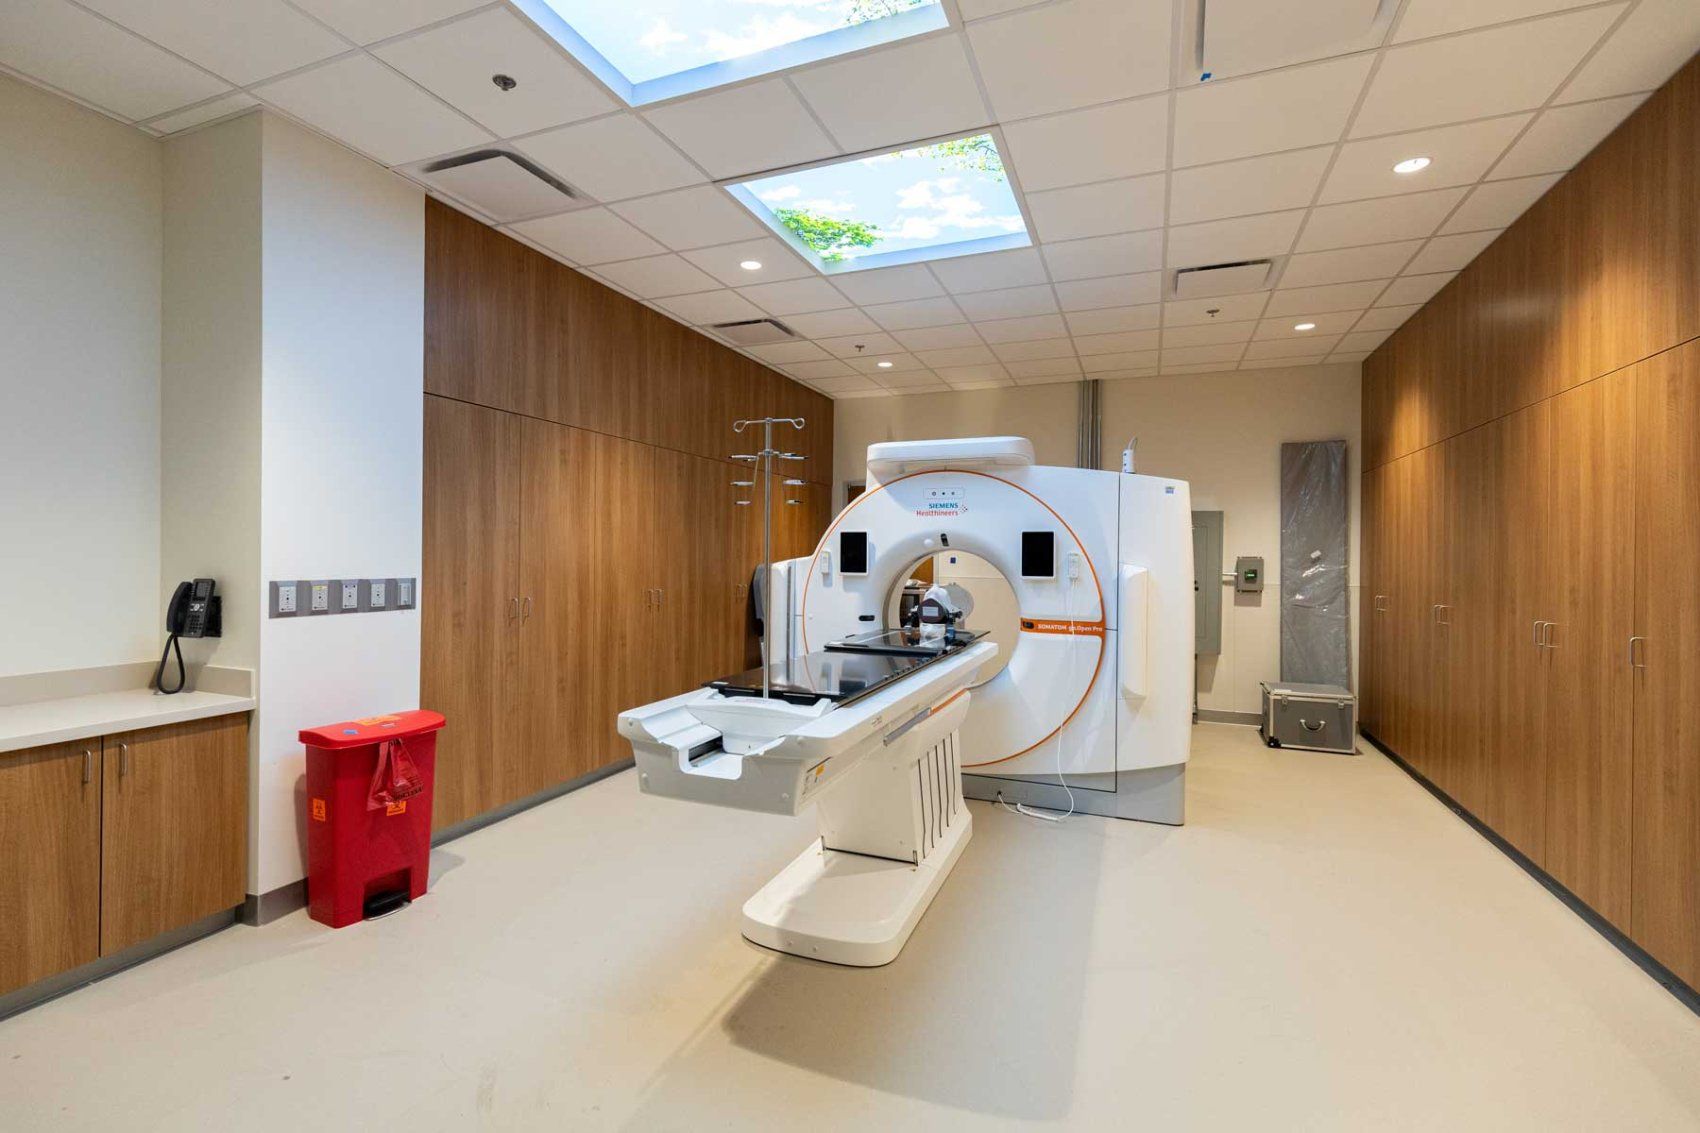 A CT scanner in an exam room with, warm, welcoming wood-paneled cabinets.